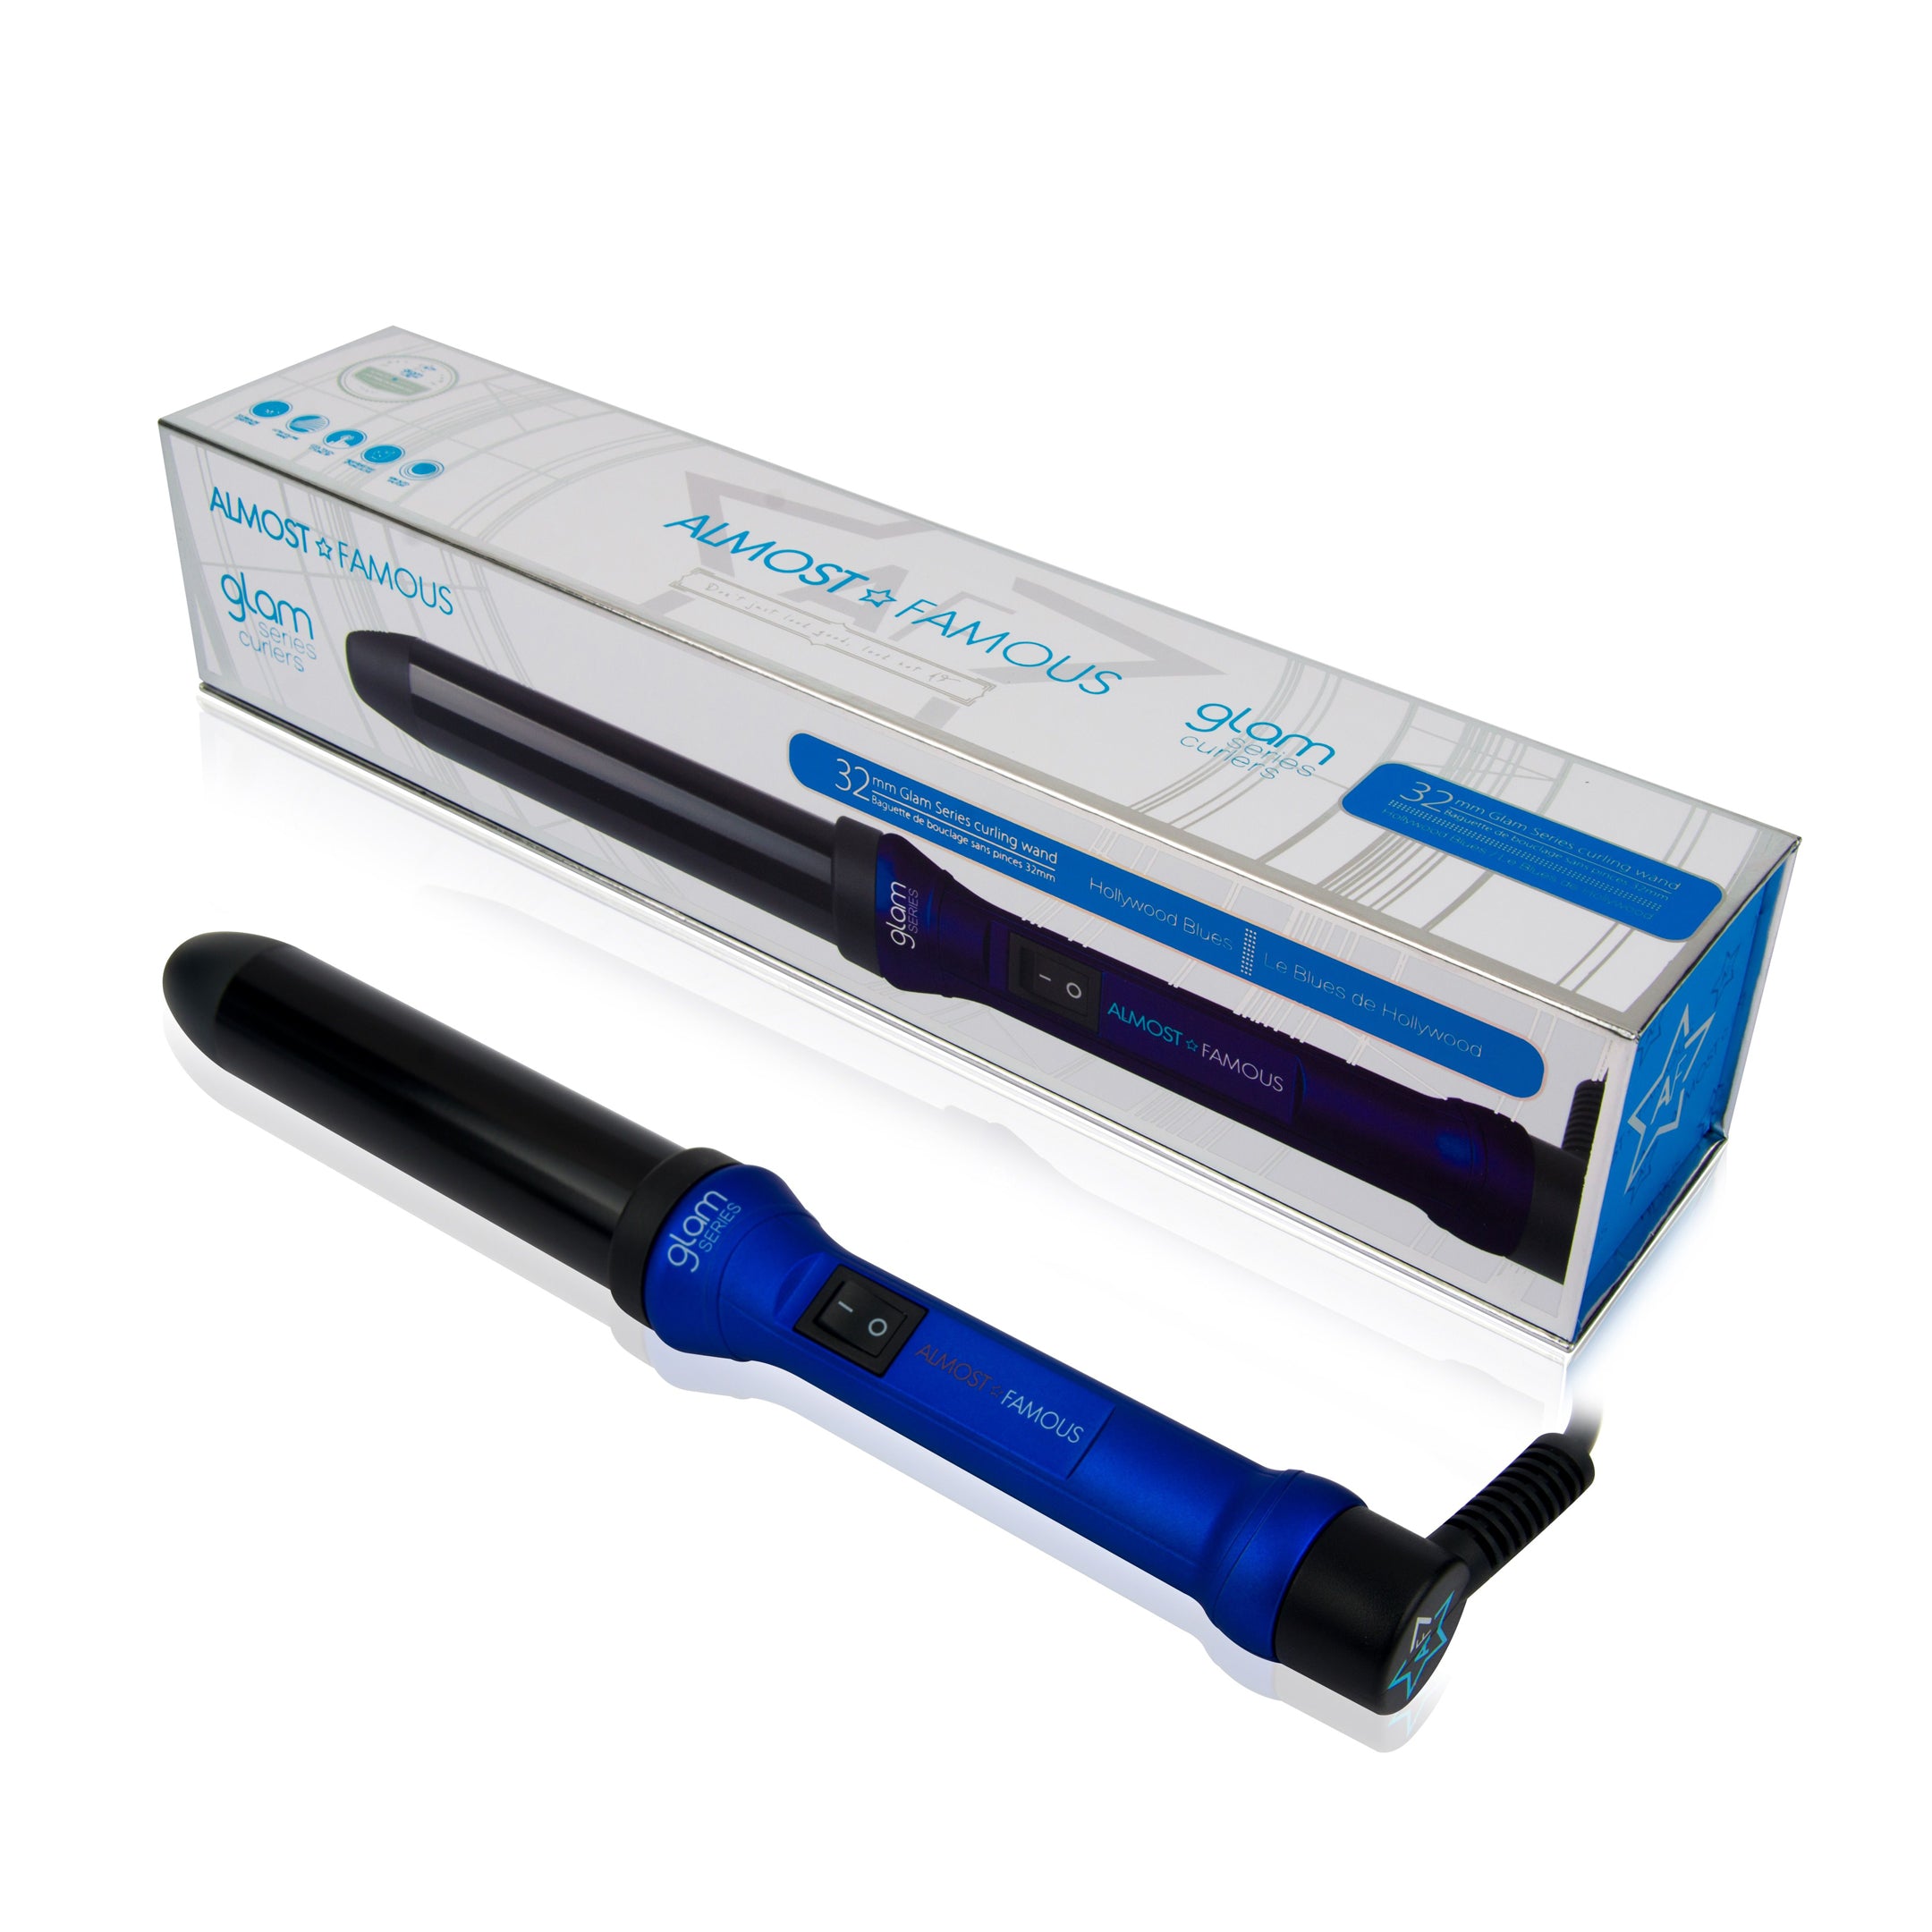 Glam Series 32mm Curling Wand with Gem Infused Barrel - Hollywood Blues